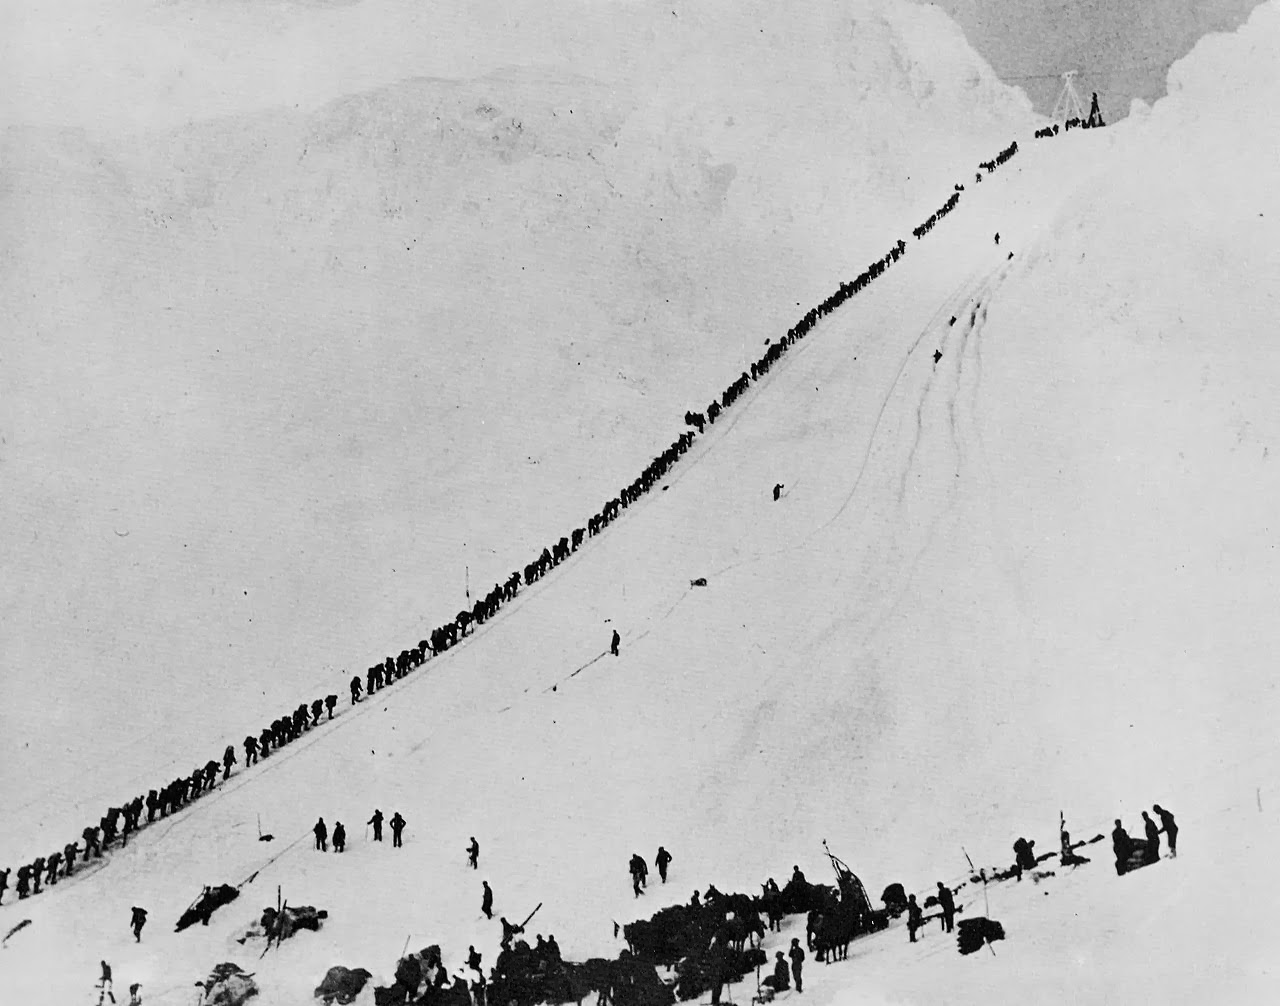 Gold diggers marching through Chilkoot pass, the only way towards Dawson City, 1898